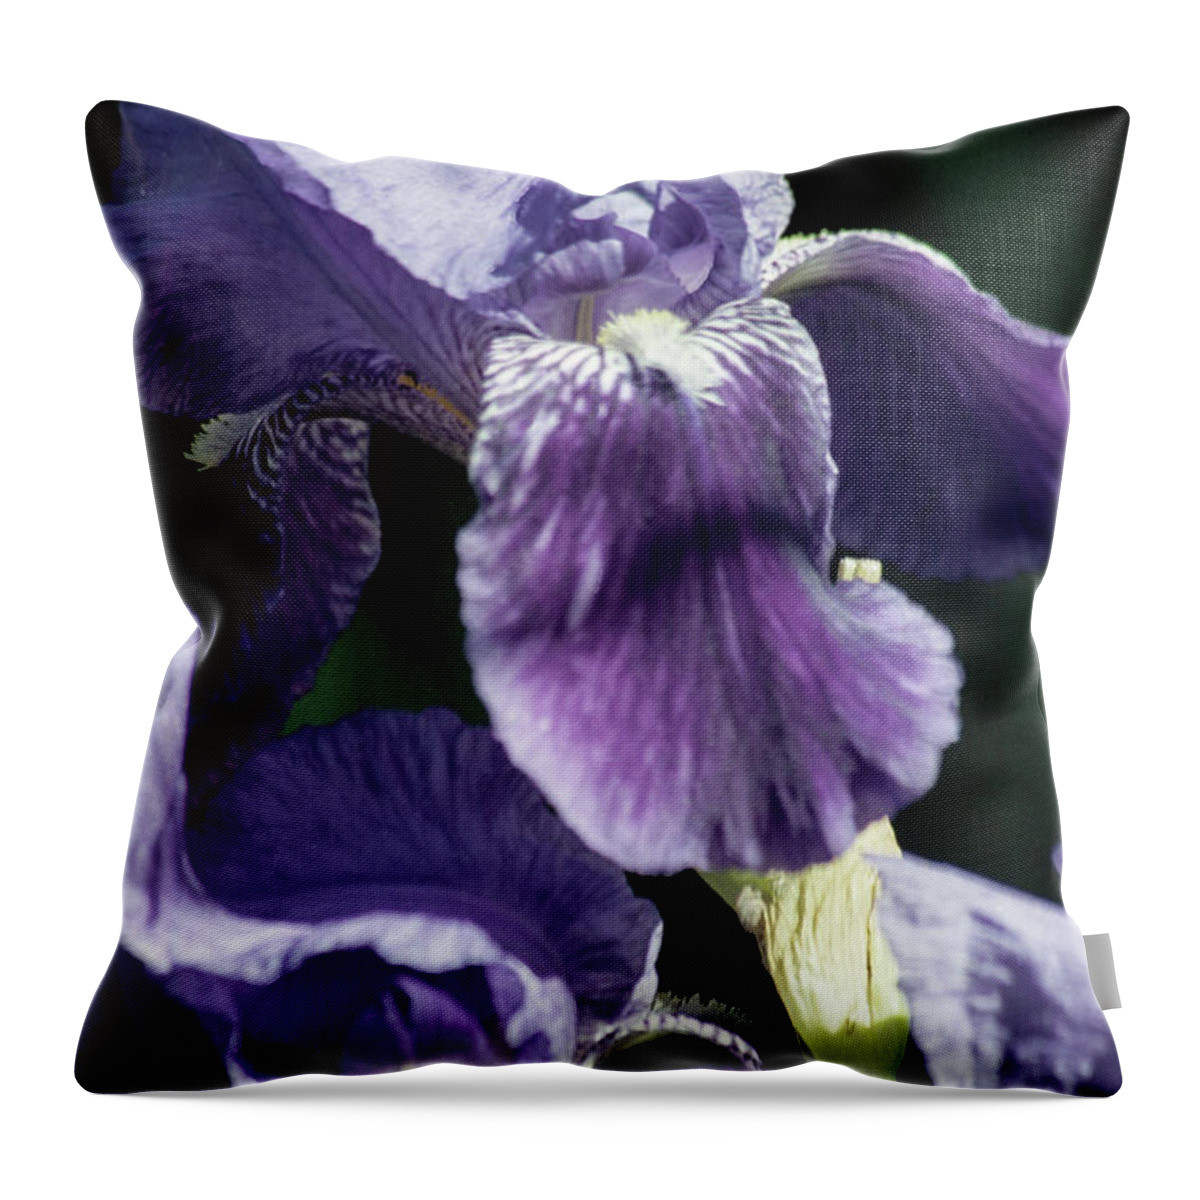 Arizona Throw Pillow featuring the photograph Displaying My Beard by Kathy McClure